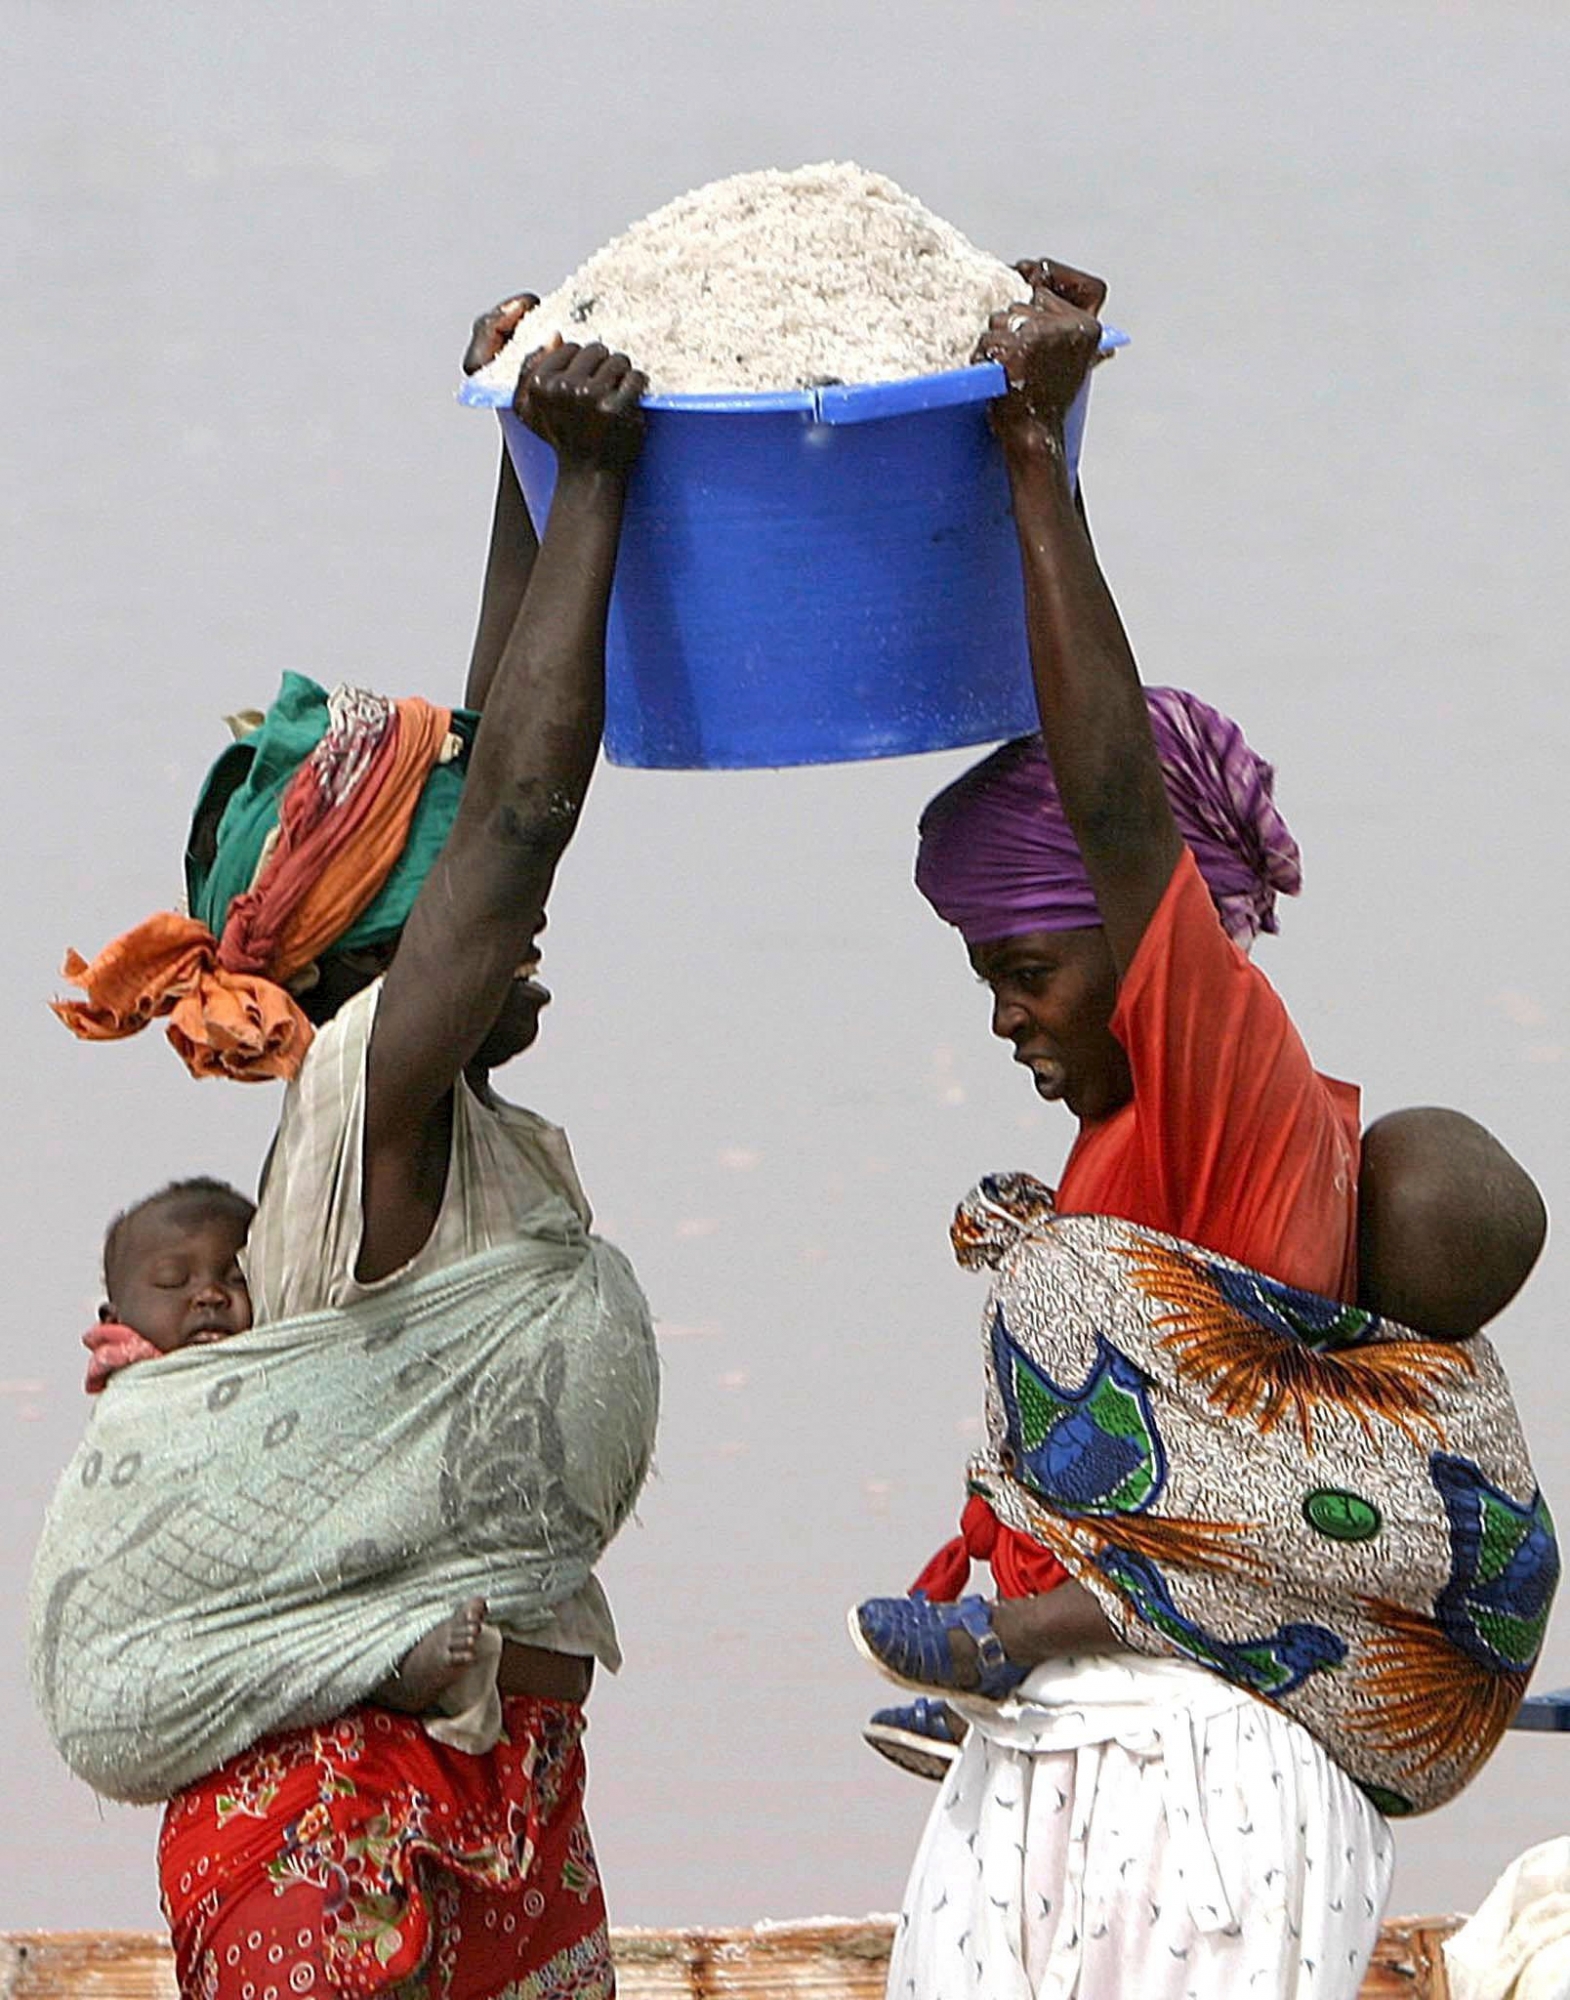 epa000455118 DEBT RELIEF SENEGAL

(FILES) Senegalese woman carrying children on their backs lift a bucket of salt from a boat to carry it ashore at Lac Rose (Pink Lake) in Senegal, Thursday 24 February 2005. Senegal is one of the 18 nations that will with immediate effect benefit from the total debt relief that was decided Saturday 11 June 2005 at the finance ministers meeting of the seven leading industrial nations and Russia in London. Under the plan, 14 of the poorest nations in Africa--Benin, Burkina Faso, Ethiopia, Ghana, Madagascar, Mali, Mauritania, Mozambique, Niger, Rwanda, Senegal, Tanzania, Uganda and Zambia--and four in Latin America--Bolivia, Guyana, Honduras and Nicaragua--would be allowed to cancel out their debts.  EPA/NIC BOTHMA SENEGAL DEBT RELIEF